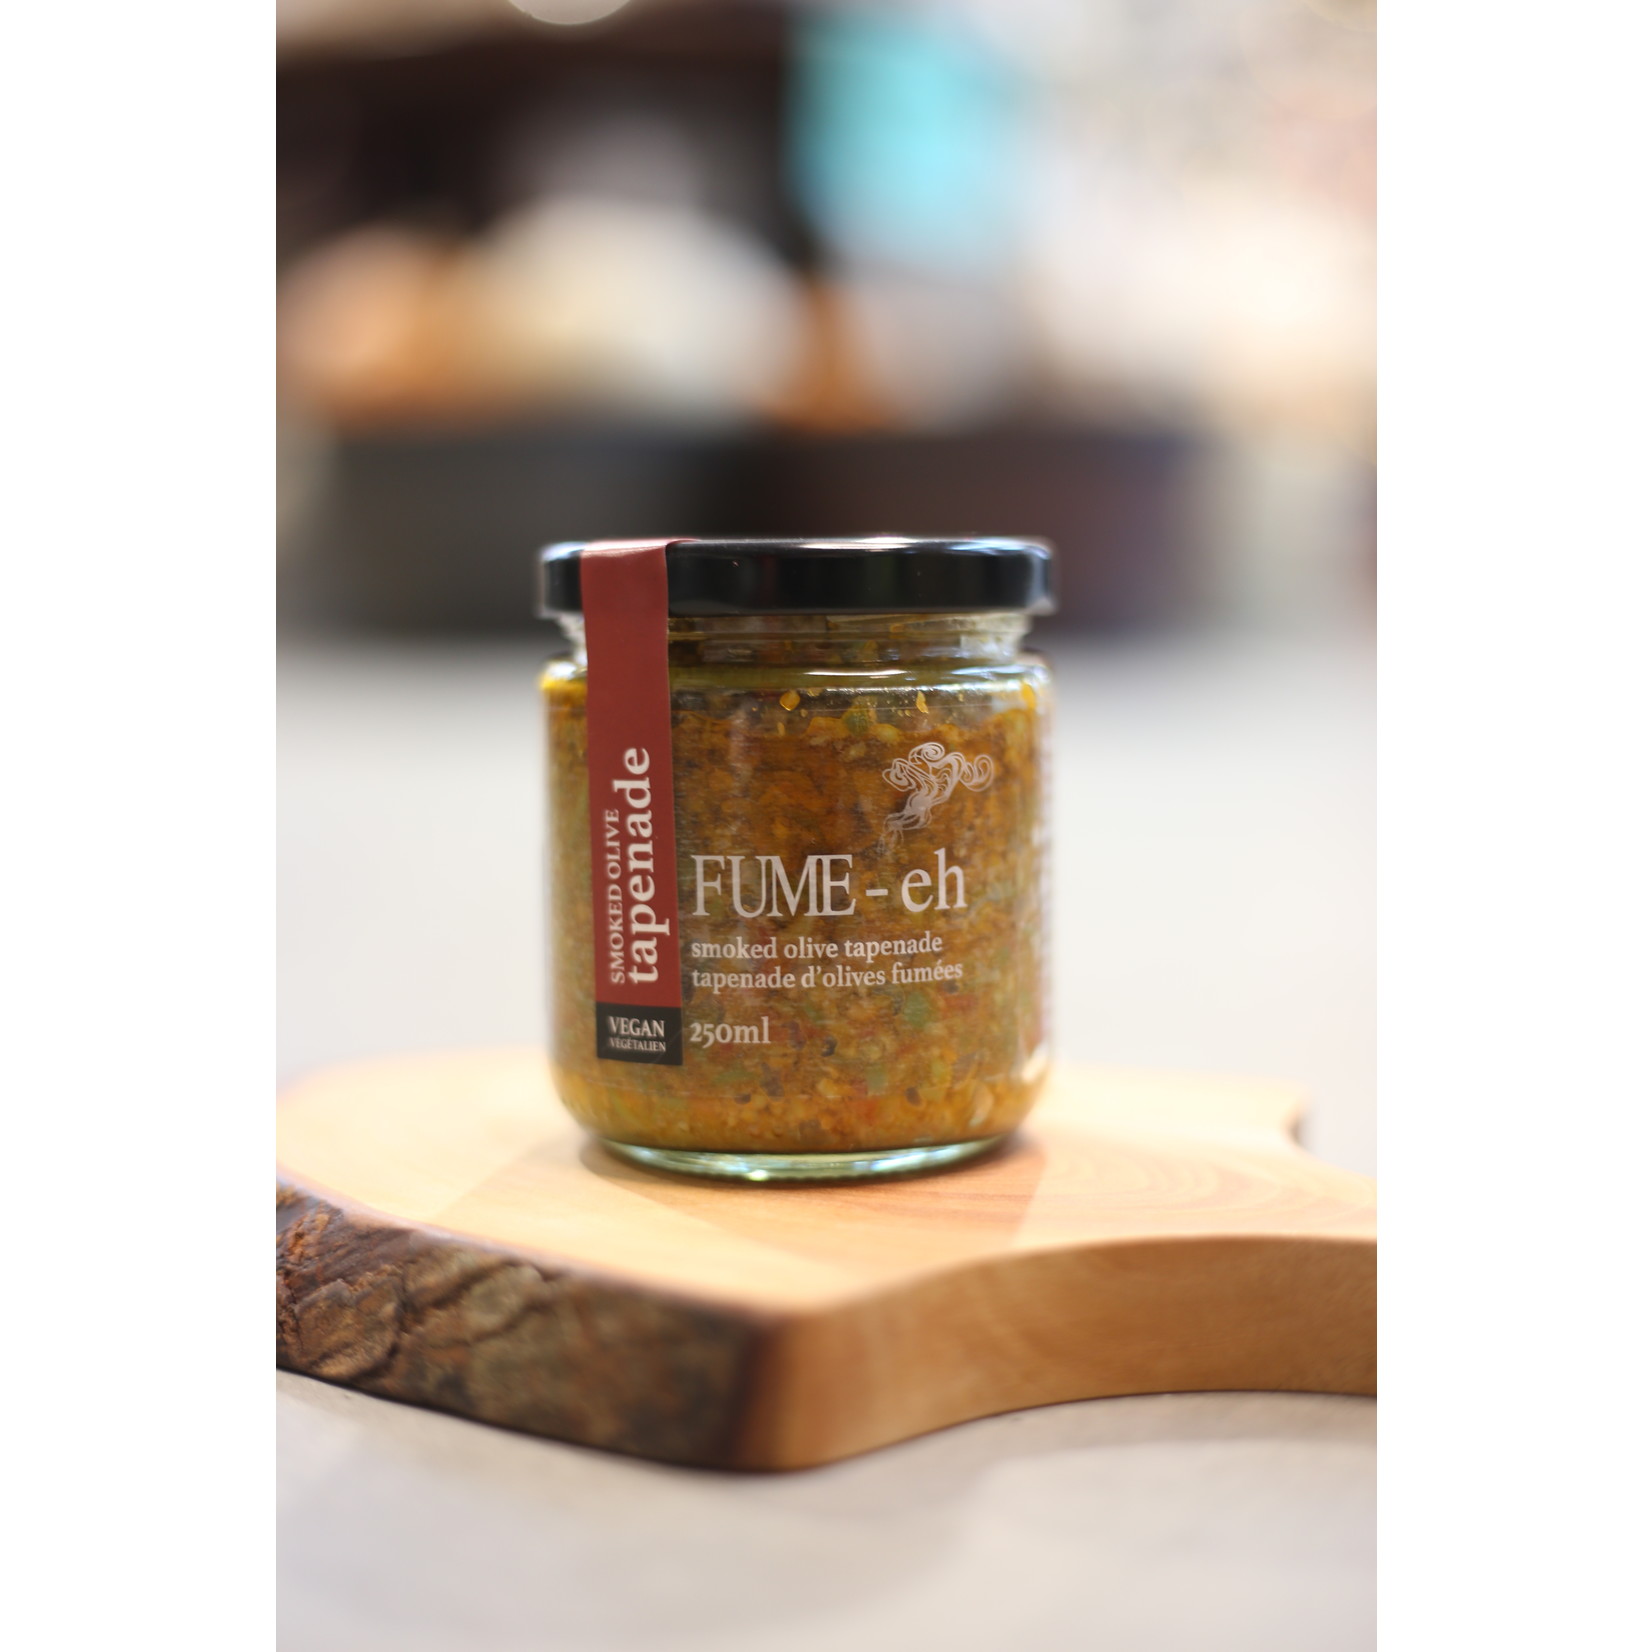 FUME-eh Smoked Olive Tapenade